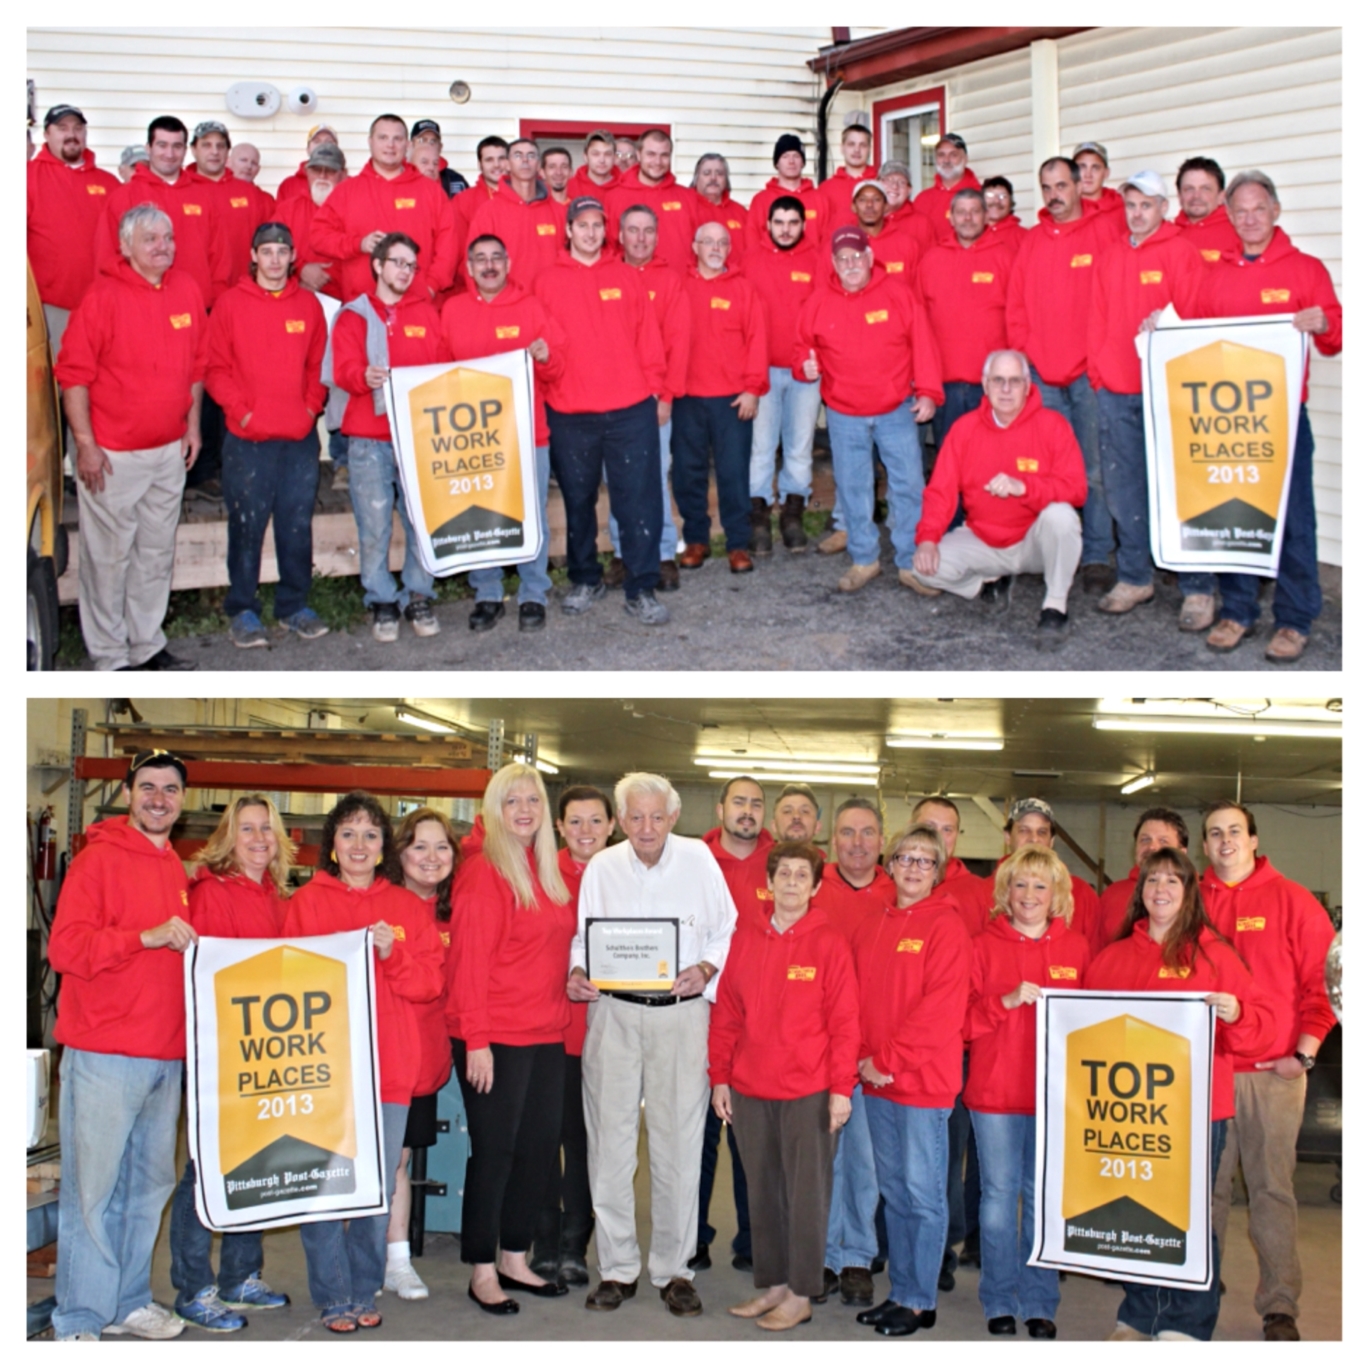 The employees of SBC celebrating the 2013 Top Workplace recognition 